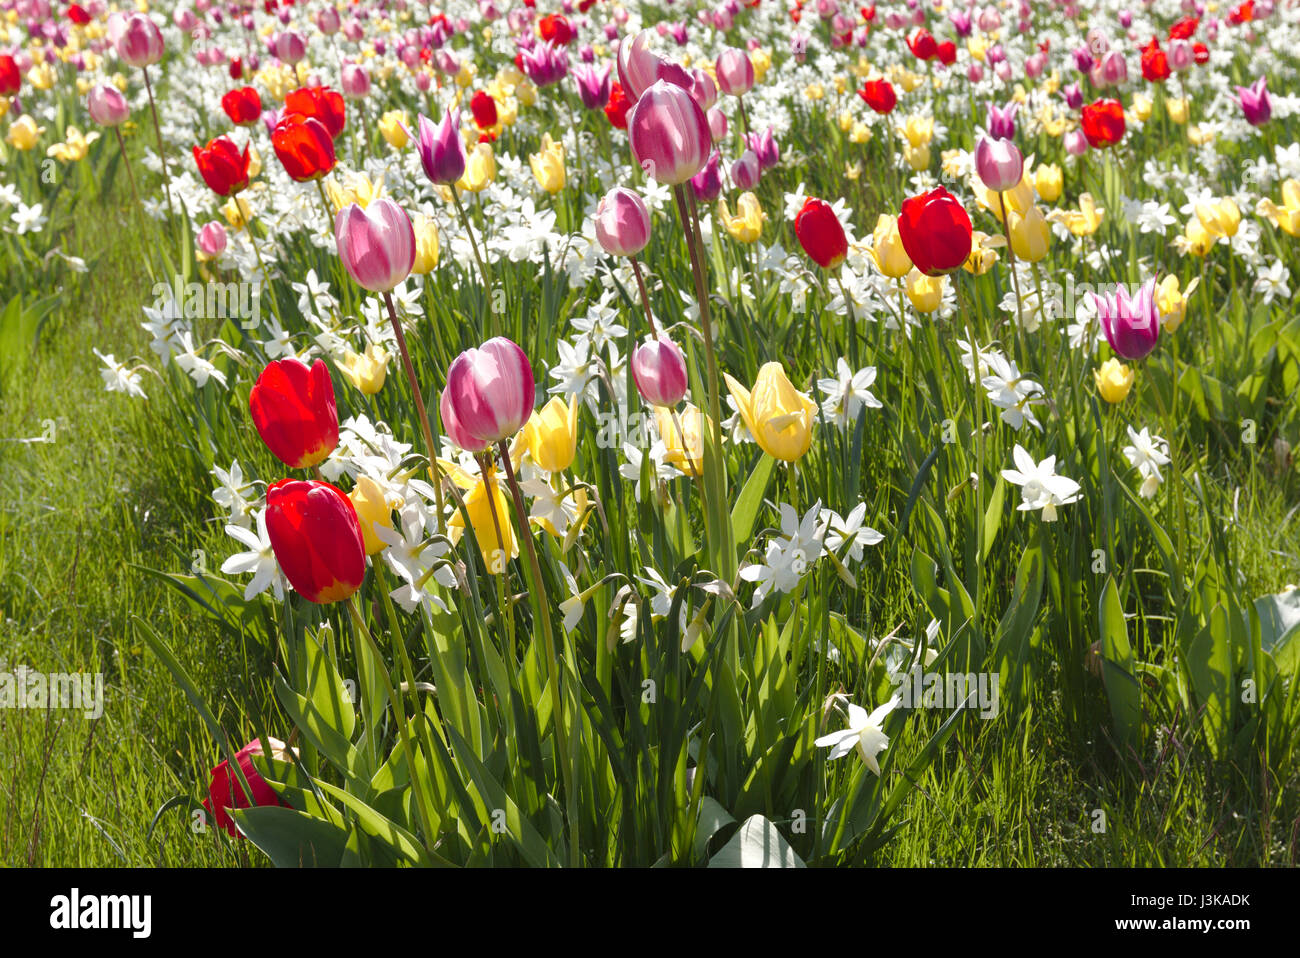 Flowerbed with tulips and daffodils Stock Photo